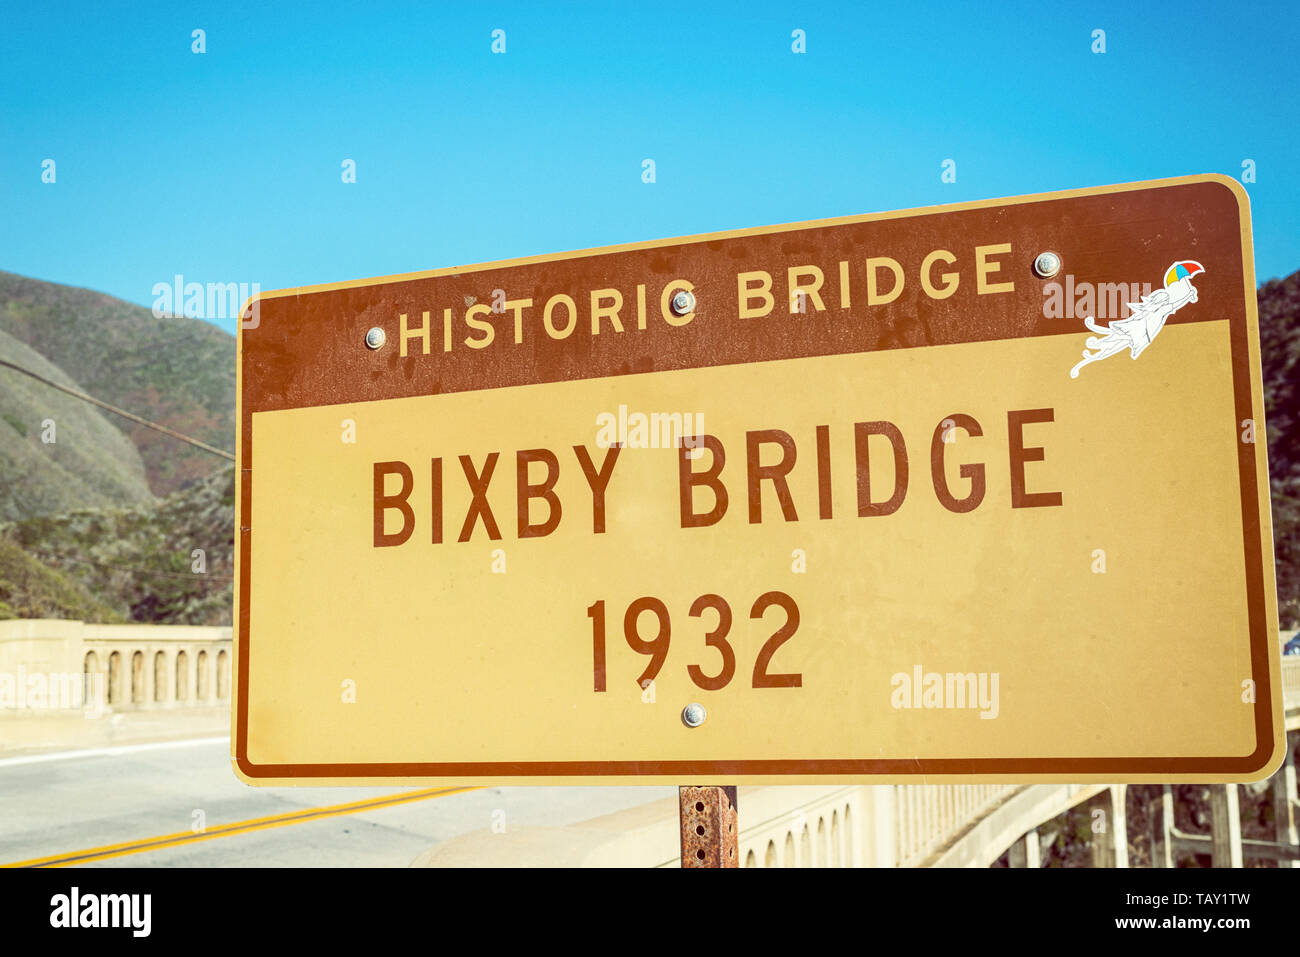 Bixby Bridge sign. Big Sur, California, United States. Photograph processed with old photo/vintage effect. Stock Photo